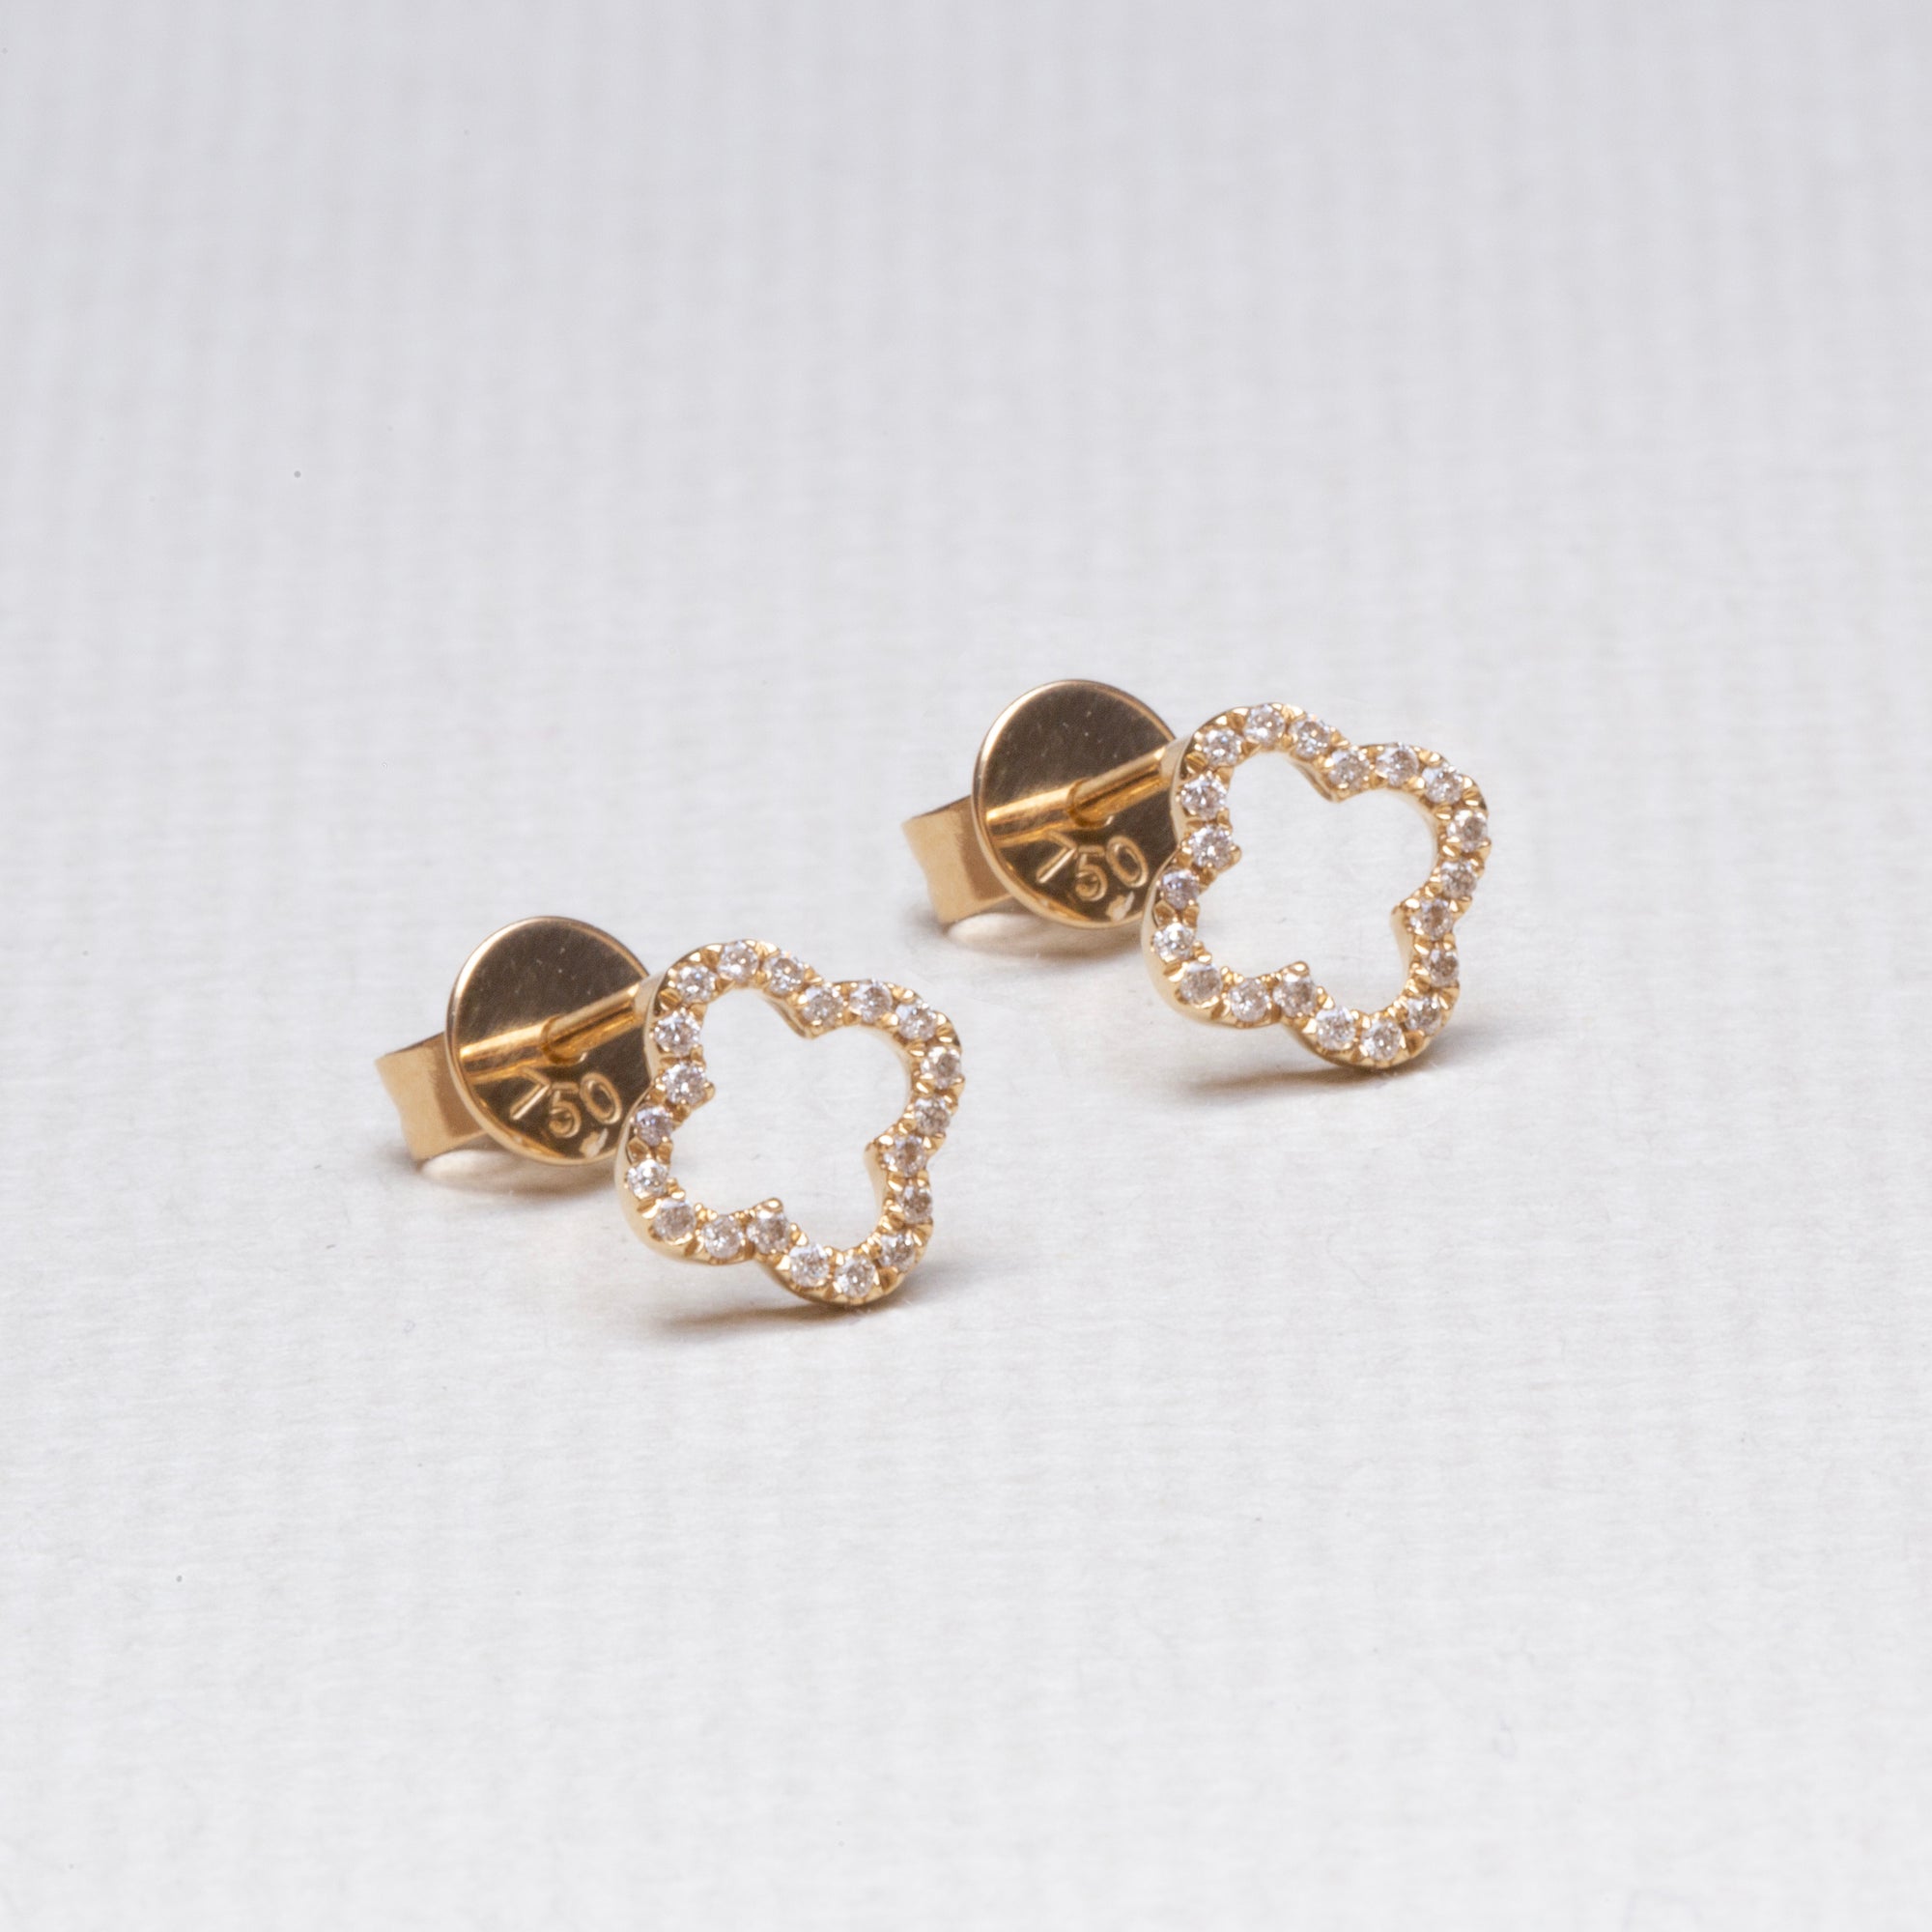 Yellow Gold Victoria Clover Stud Earrings with Diamonds